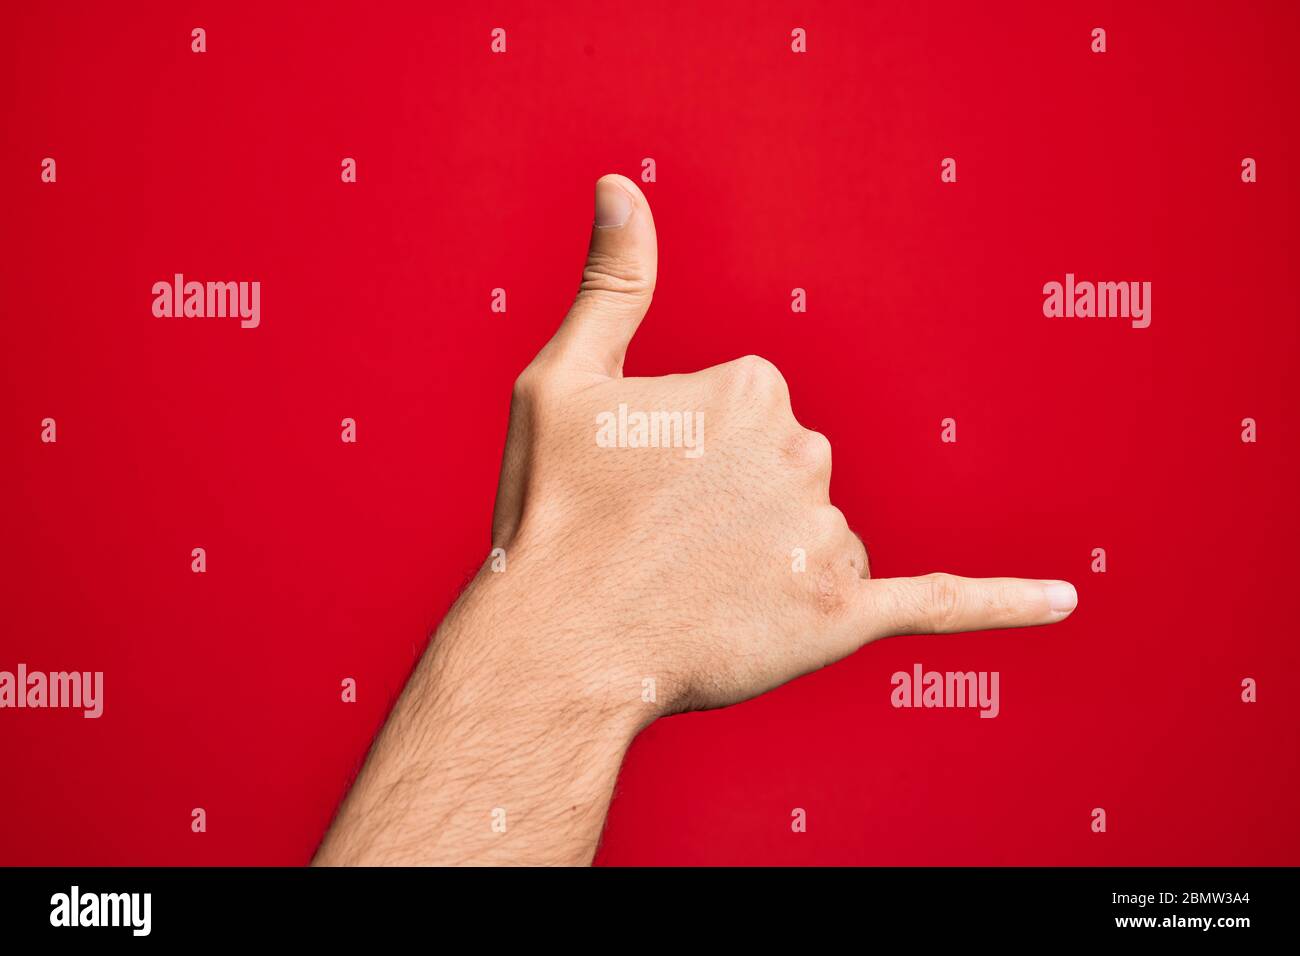 Hand of caucasian young man showing fingers over isolated red background gesturing Hawaiian shaka greeting gesture, telephone and communication symbol Stock Photo